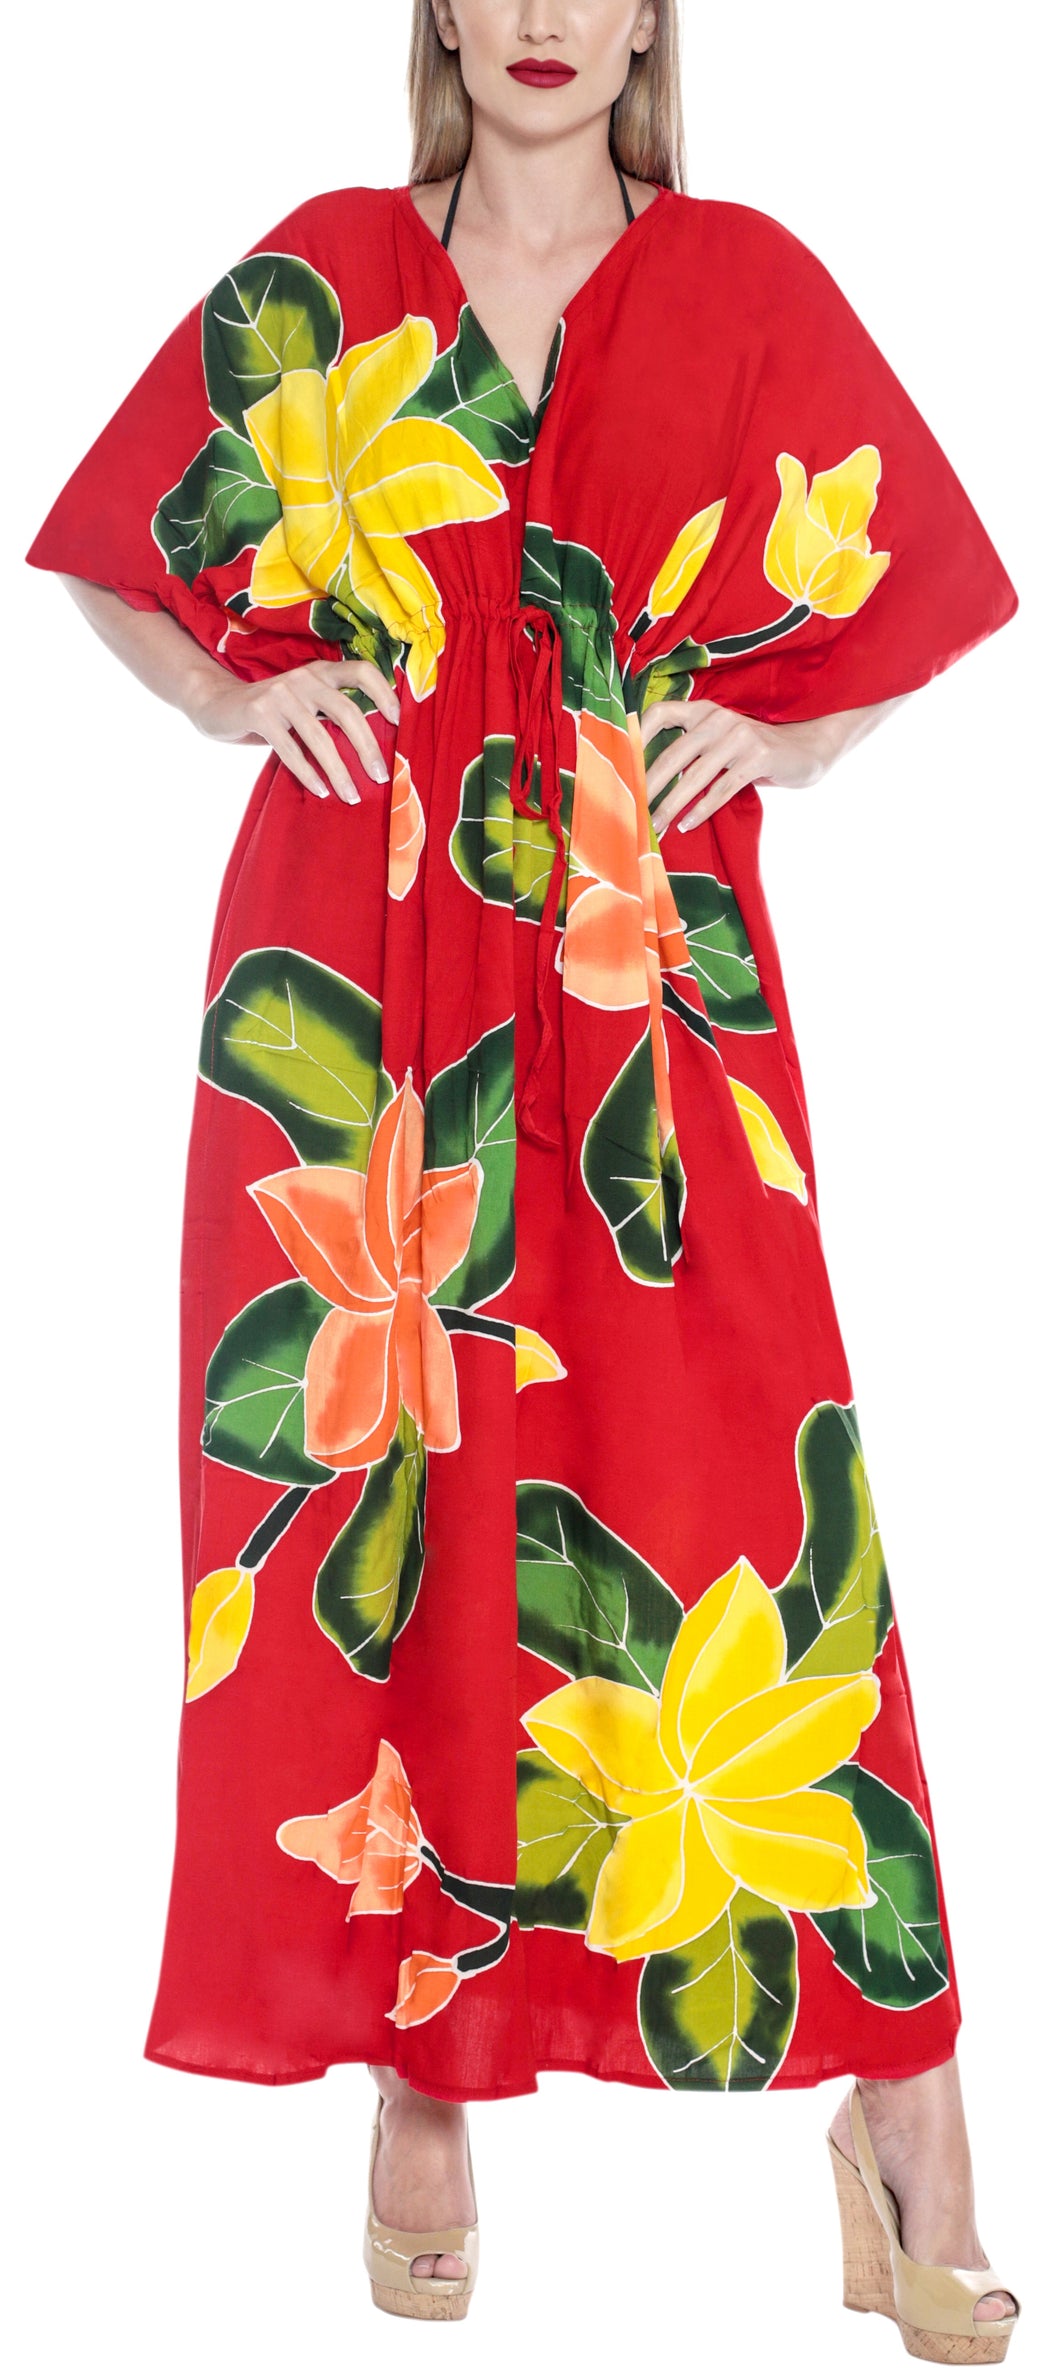 la-leela-lounge-rayon-printed-vacation-caftan-womens-party-top-red-237-one-size